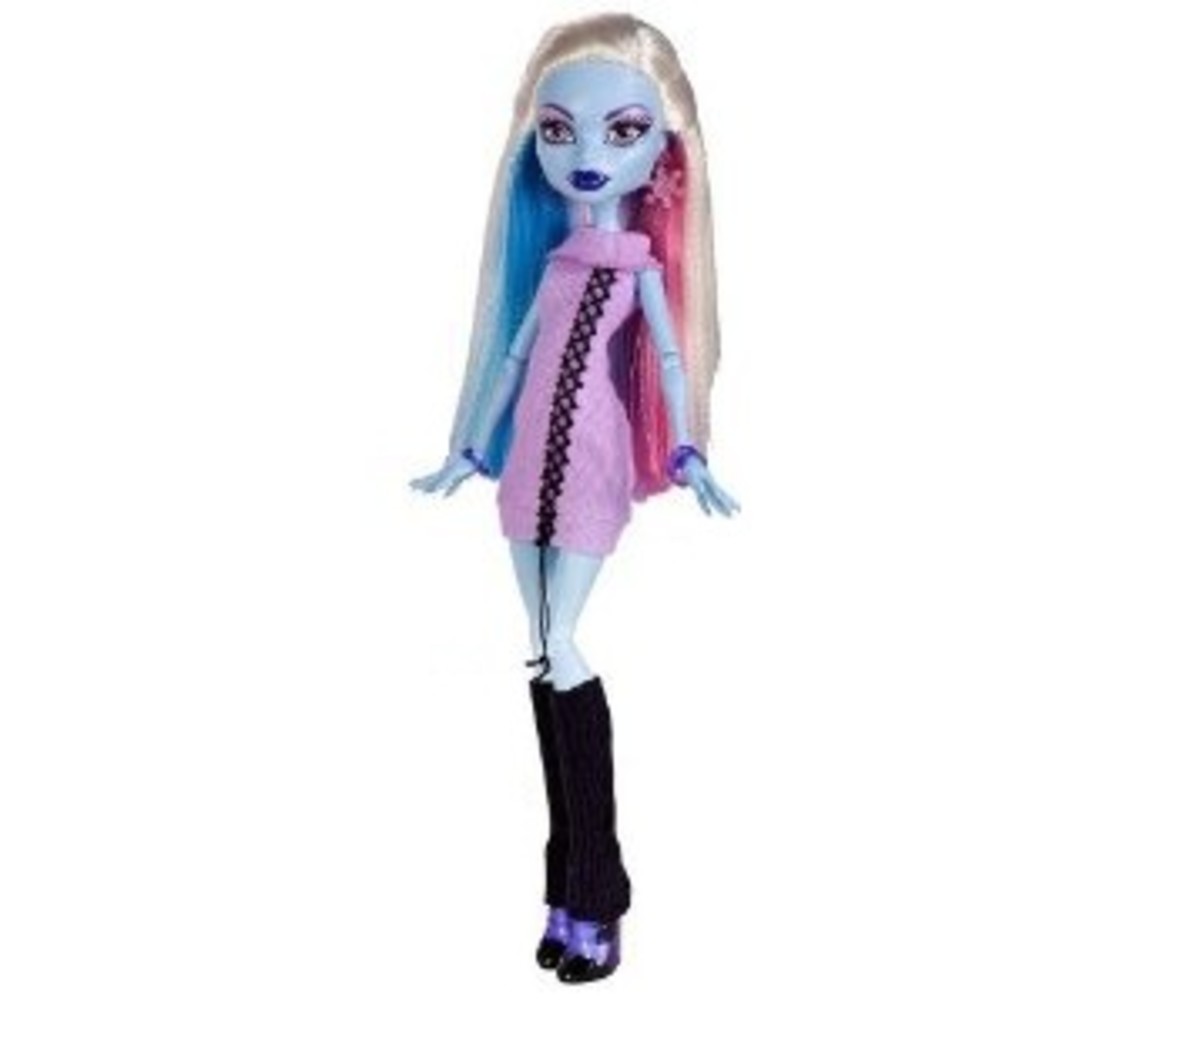 abbey-bominable-dolls-from-monster-high-list-of-dolls